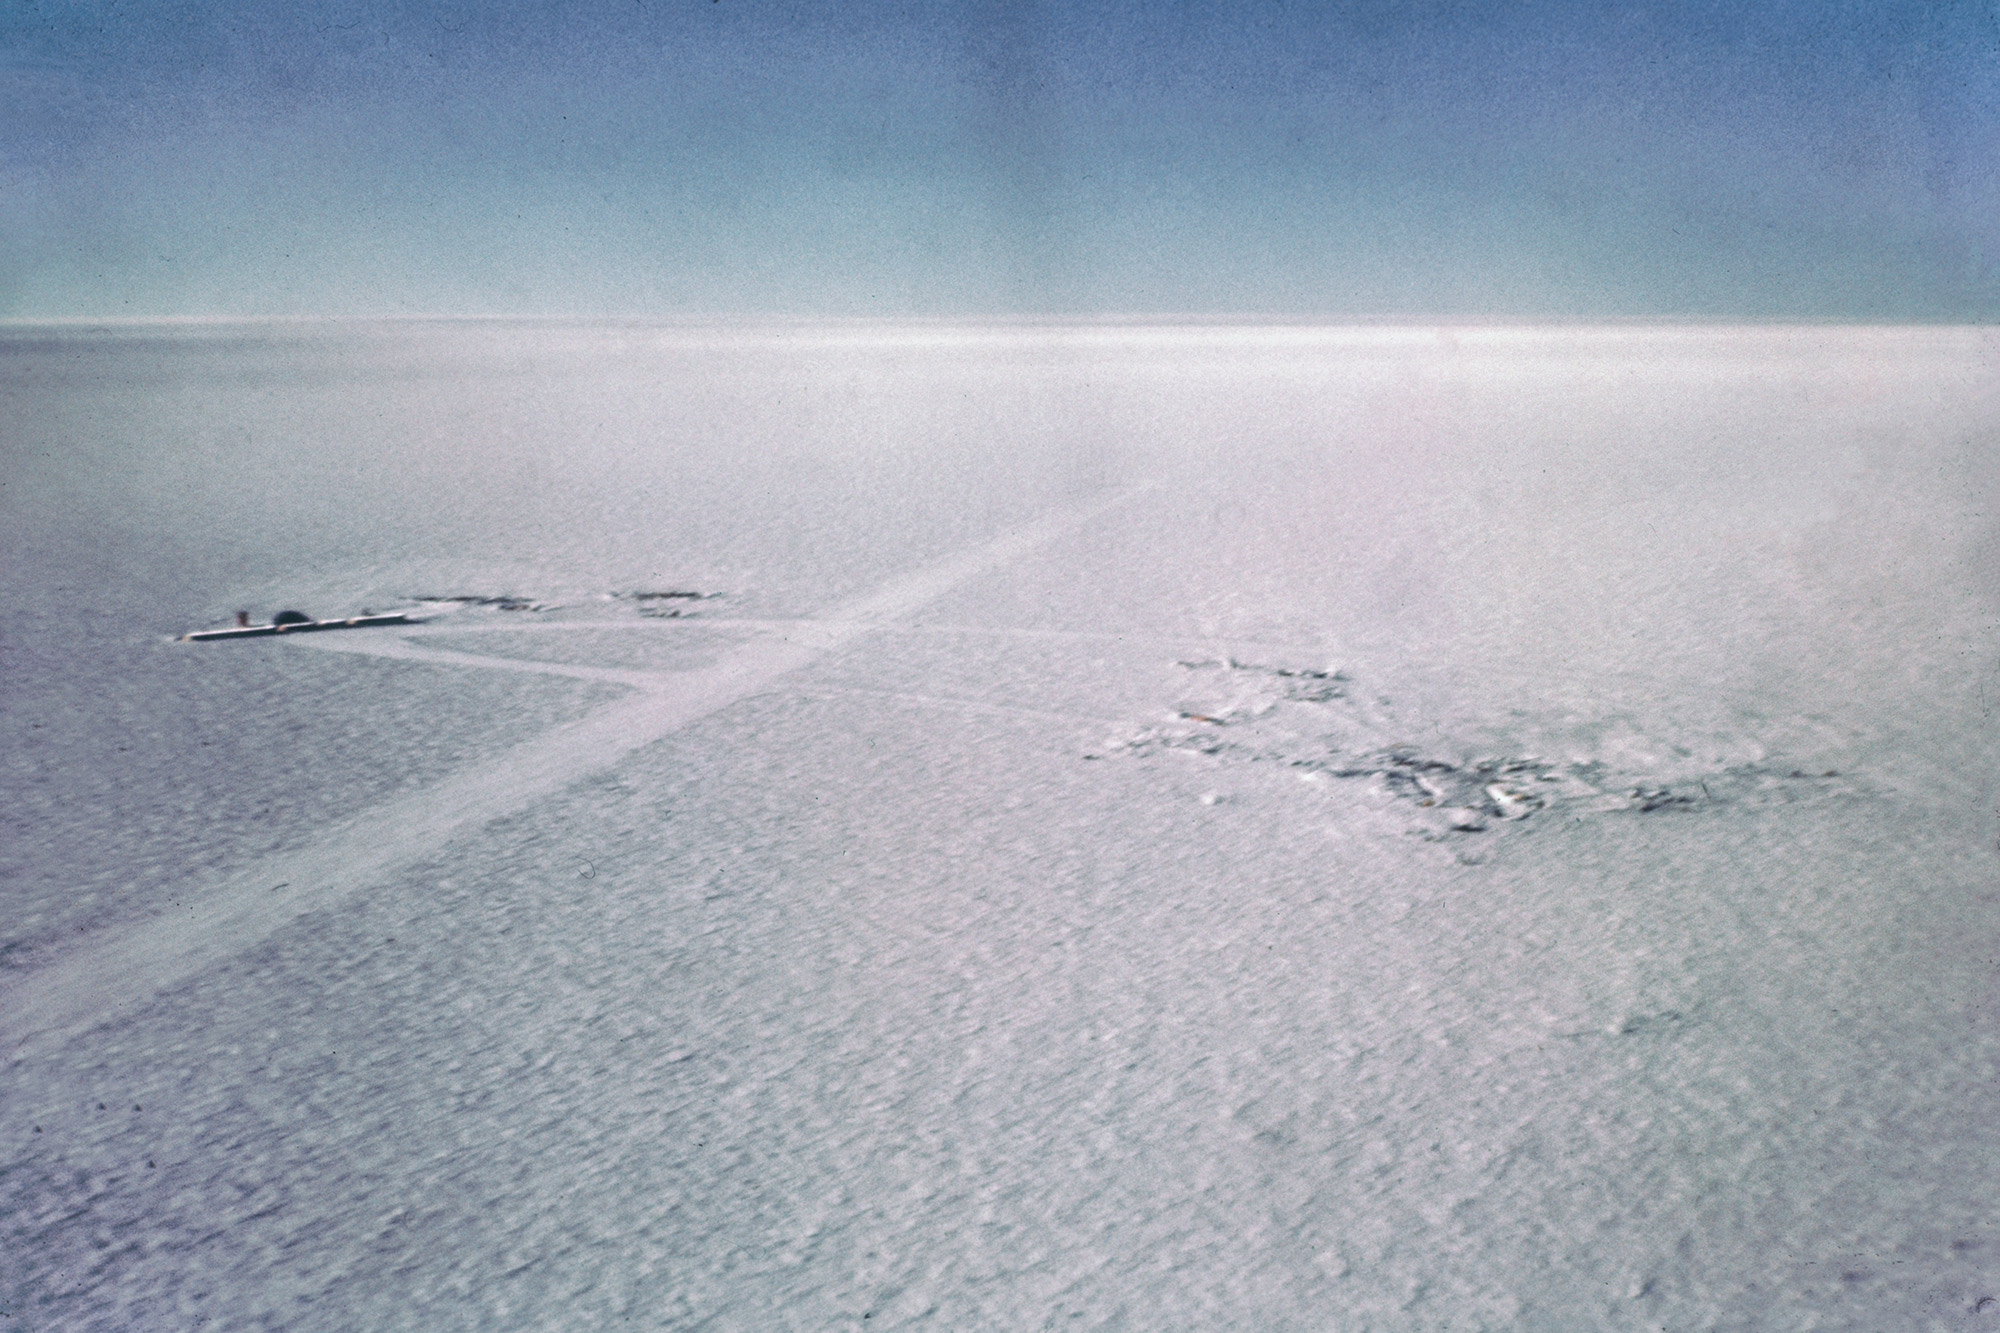 Arriving at the South Pole by air